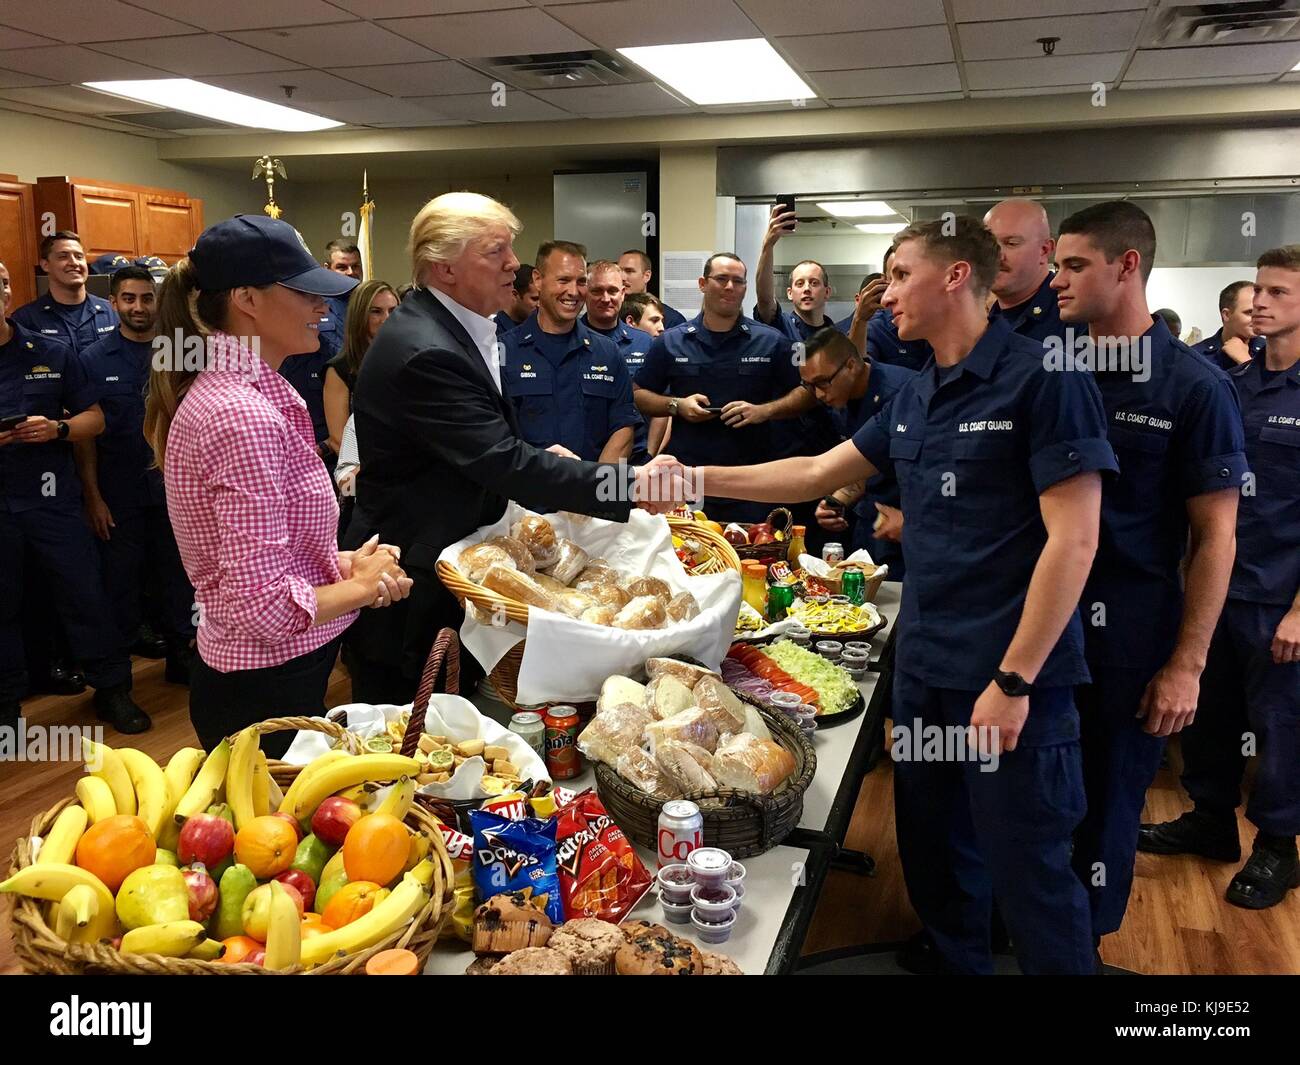 Coast Guard Station, Riviera Beach, Florida, USA. 23rd Nov, 2017. U.S. President Donald Trump and First Lady Melania Trump greet Coast Guardsmen as they serve lunch on Thanksgiving Day during a visit to the U.S. Coast Guard Station Lake Worth Inlet November 23, 2017 in Riviera Beach, Florida. Credit: Planetpix/Alamy Live News Stock Photo